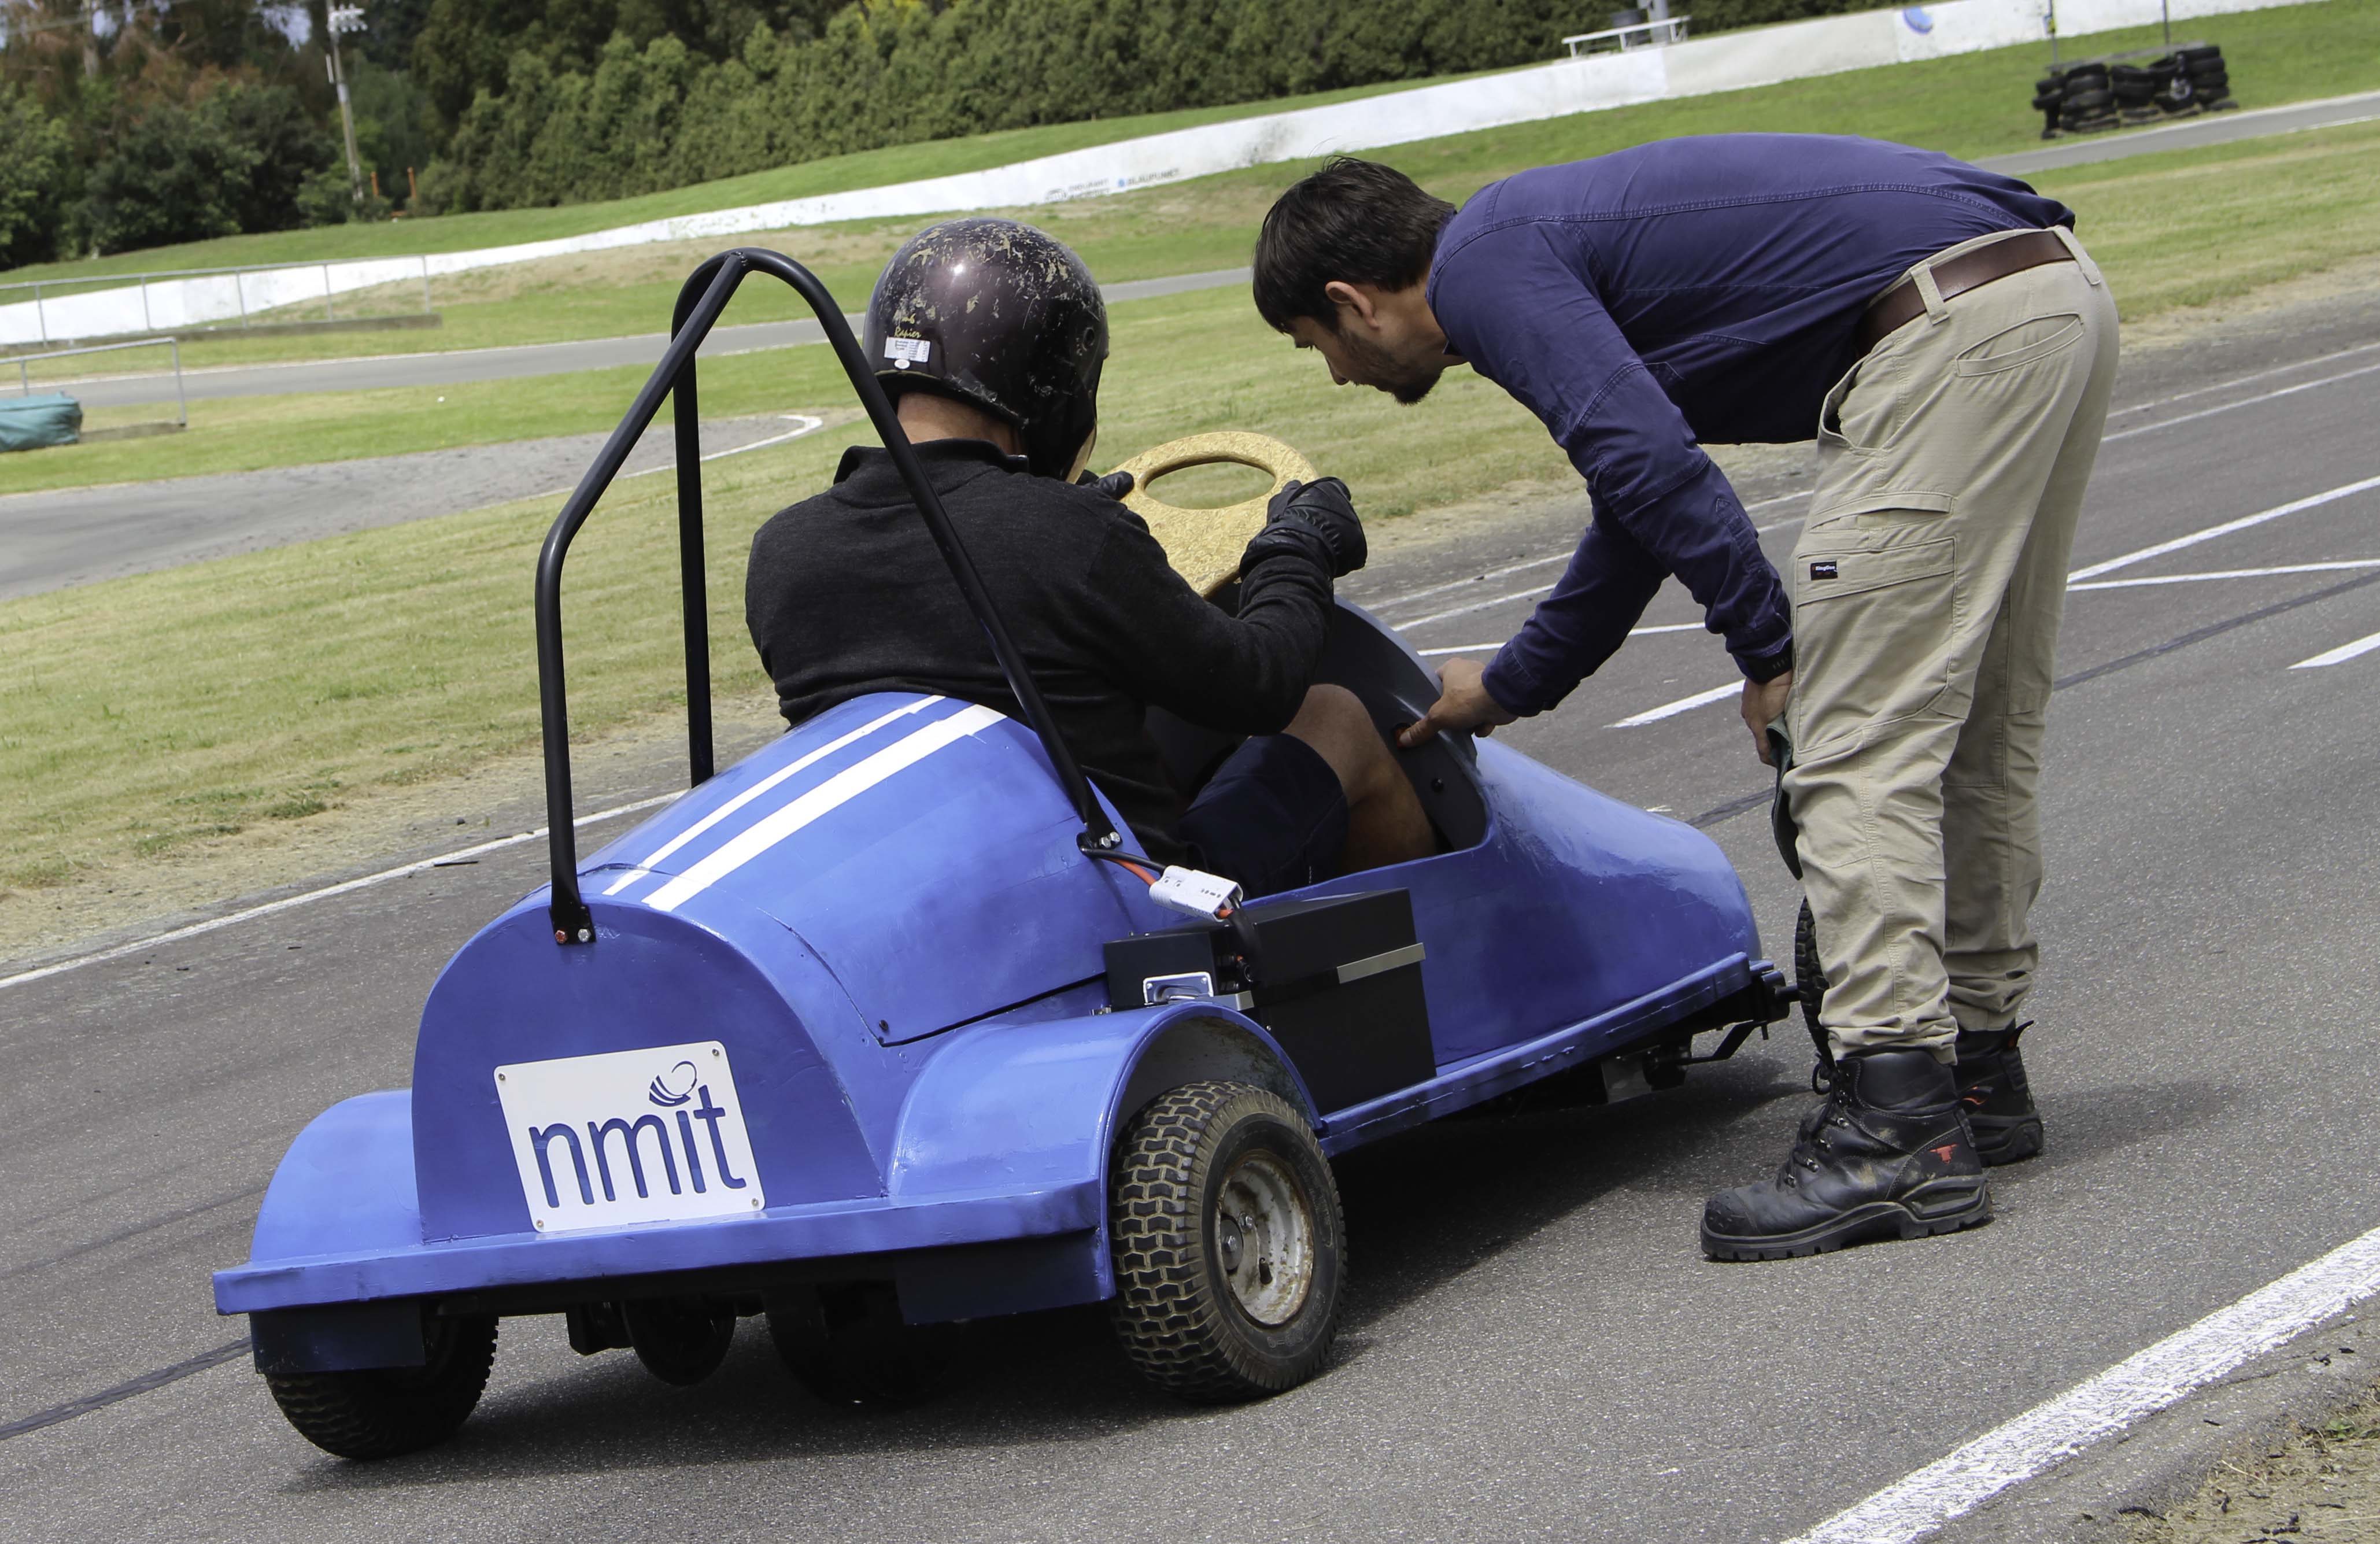 nmitelectric car